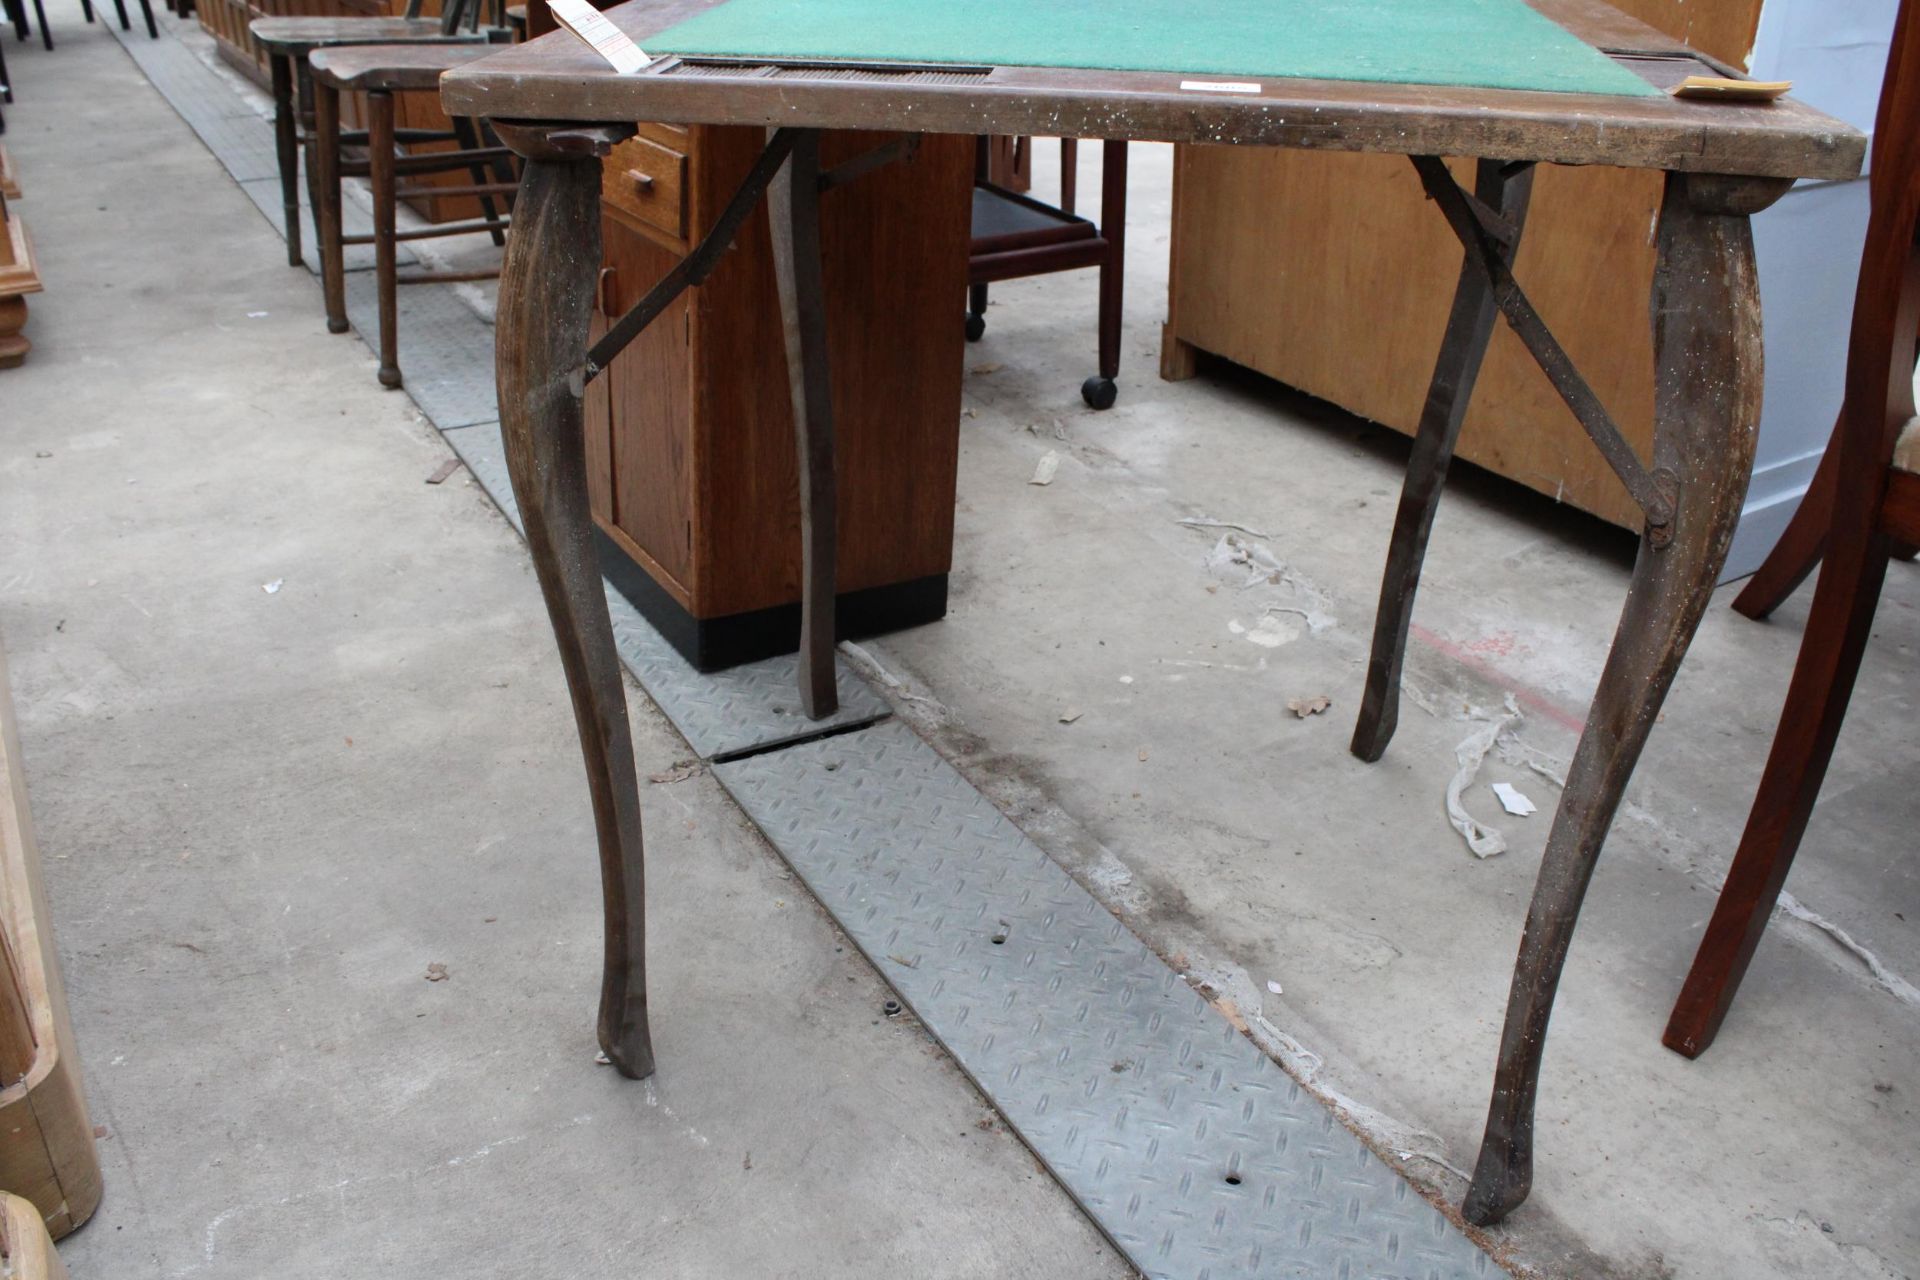 AN EARLY 20TH CENTURY FOLDING CARD TABLE WITH BAKALITE FOLD AWAY GLASS HOLDERS AND TAMBOUR SCORE - Image 7 of 7